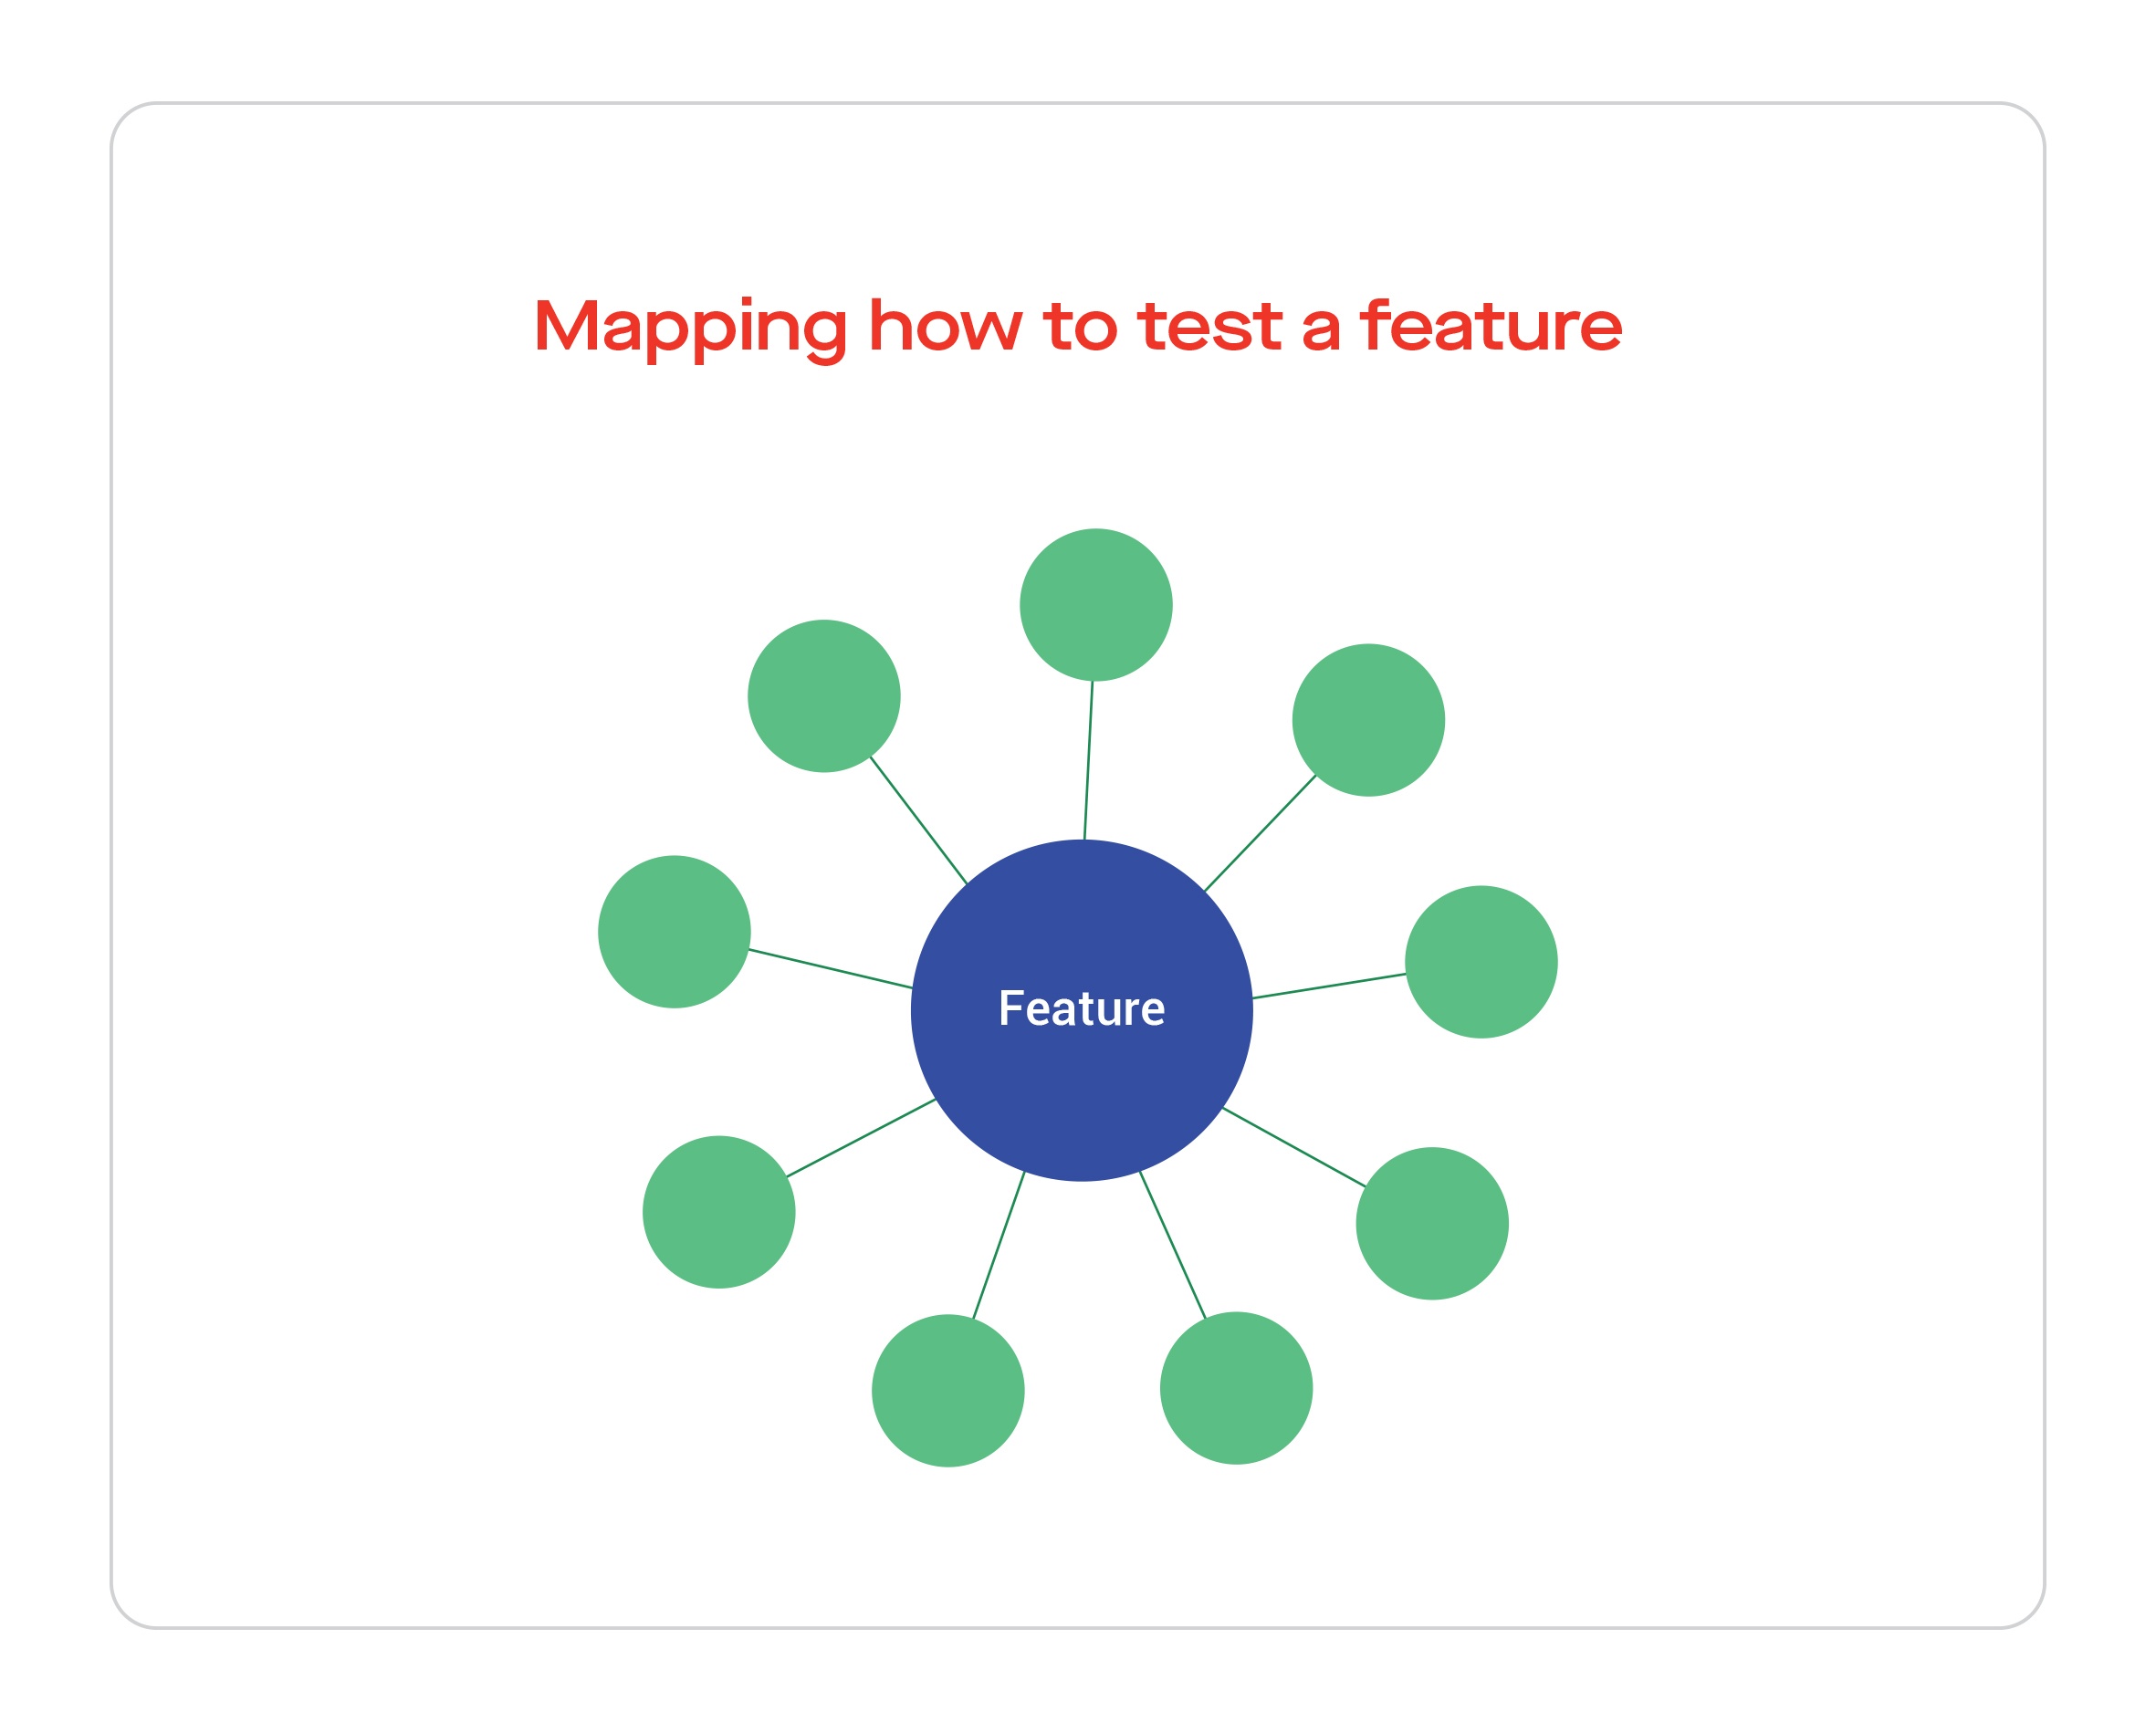 Mapping how to test a feature